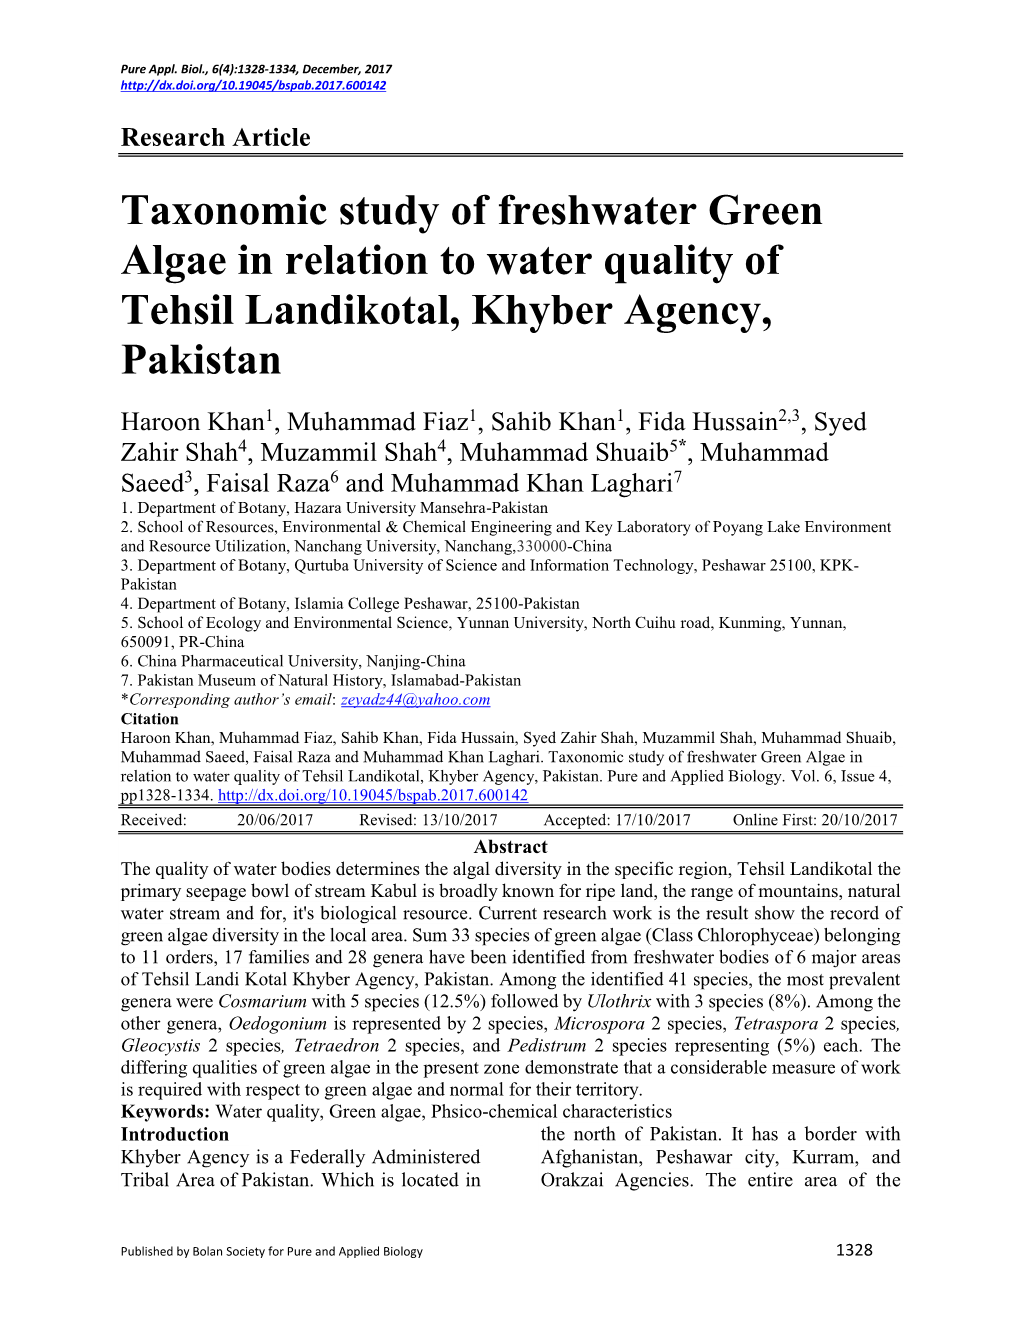 Taxonomic Study of Freshwater Green Algae in Relation to Water Quality of Tehsil Landikotal, Khyber Agency, Pakistan